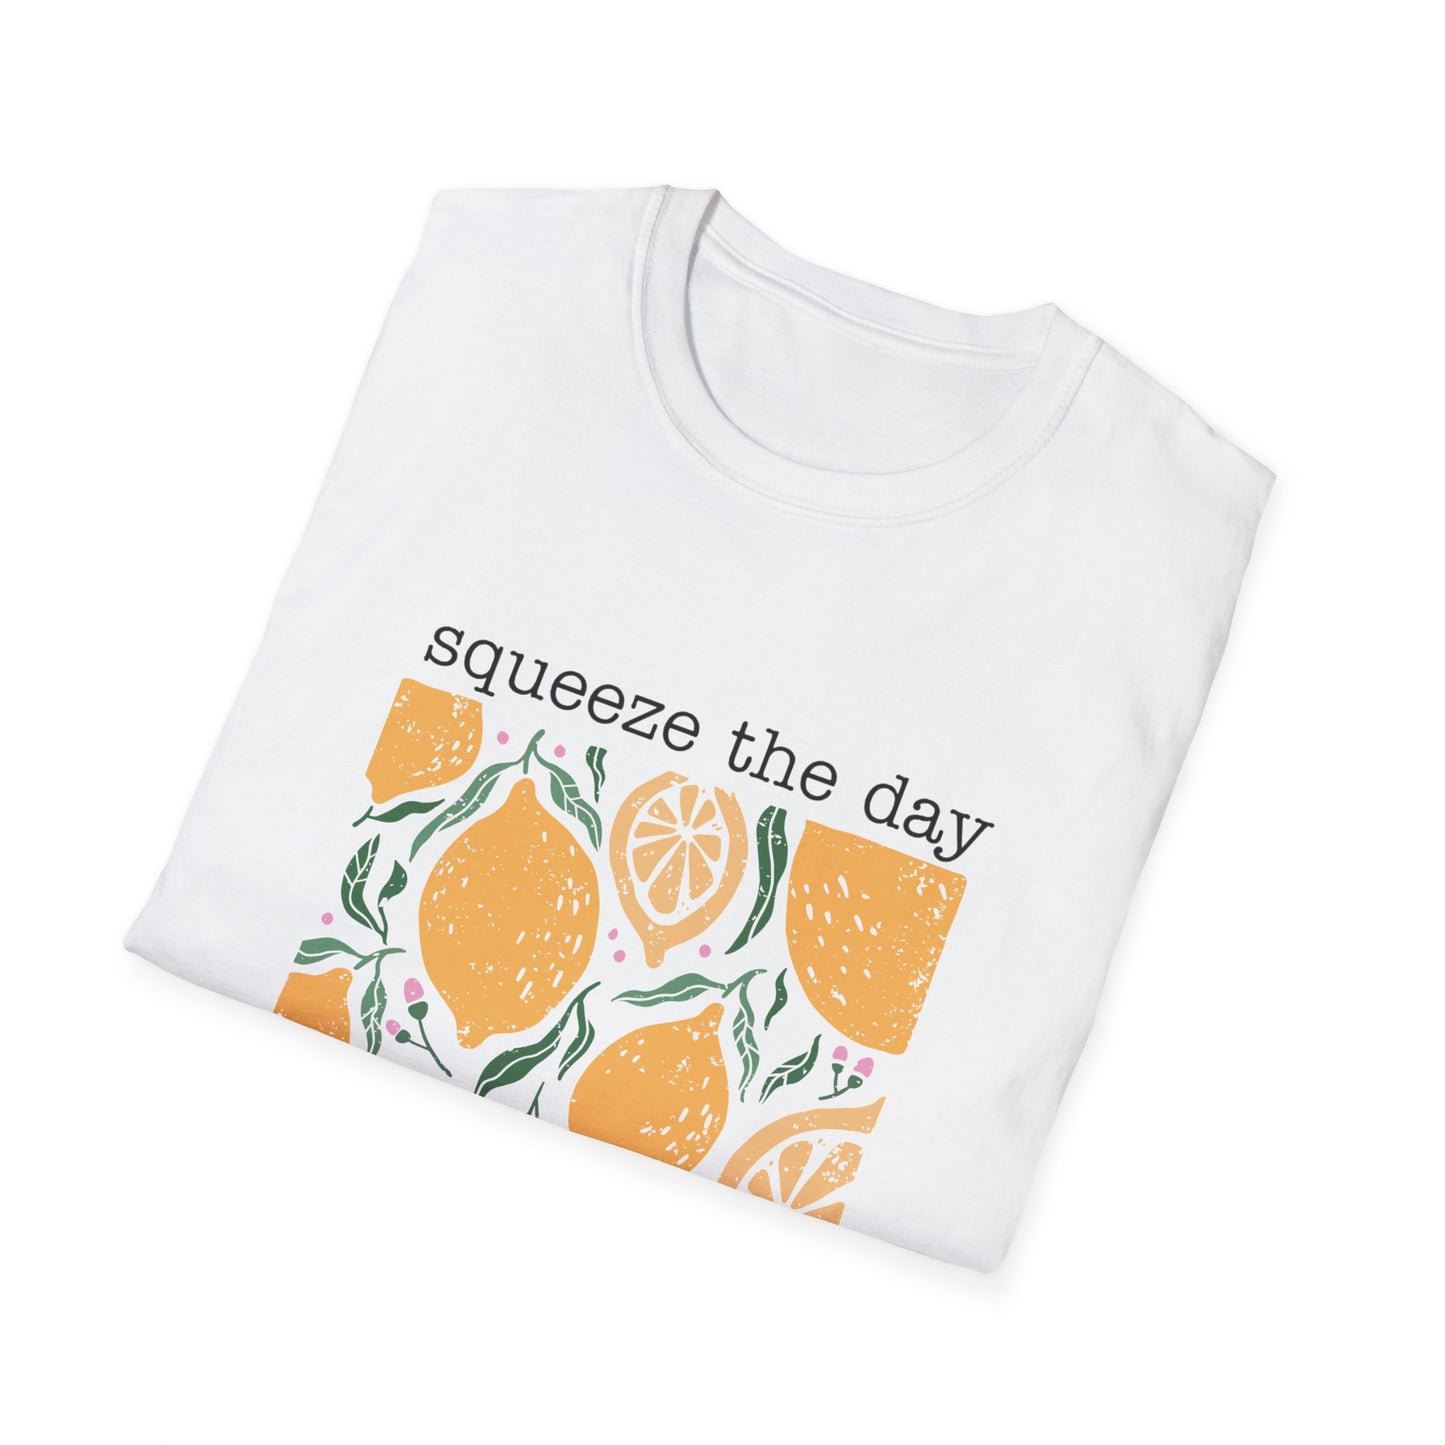 Squeeze the Day|Softstyle T-Shirt